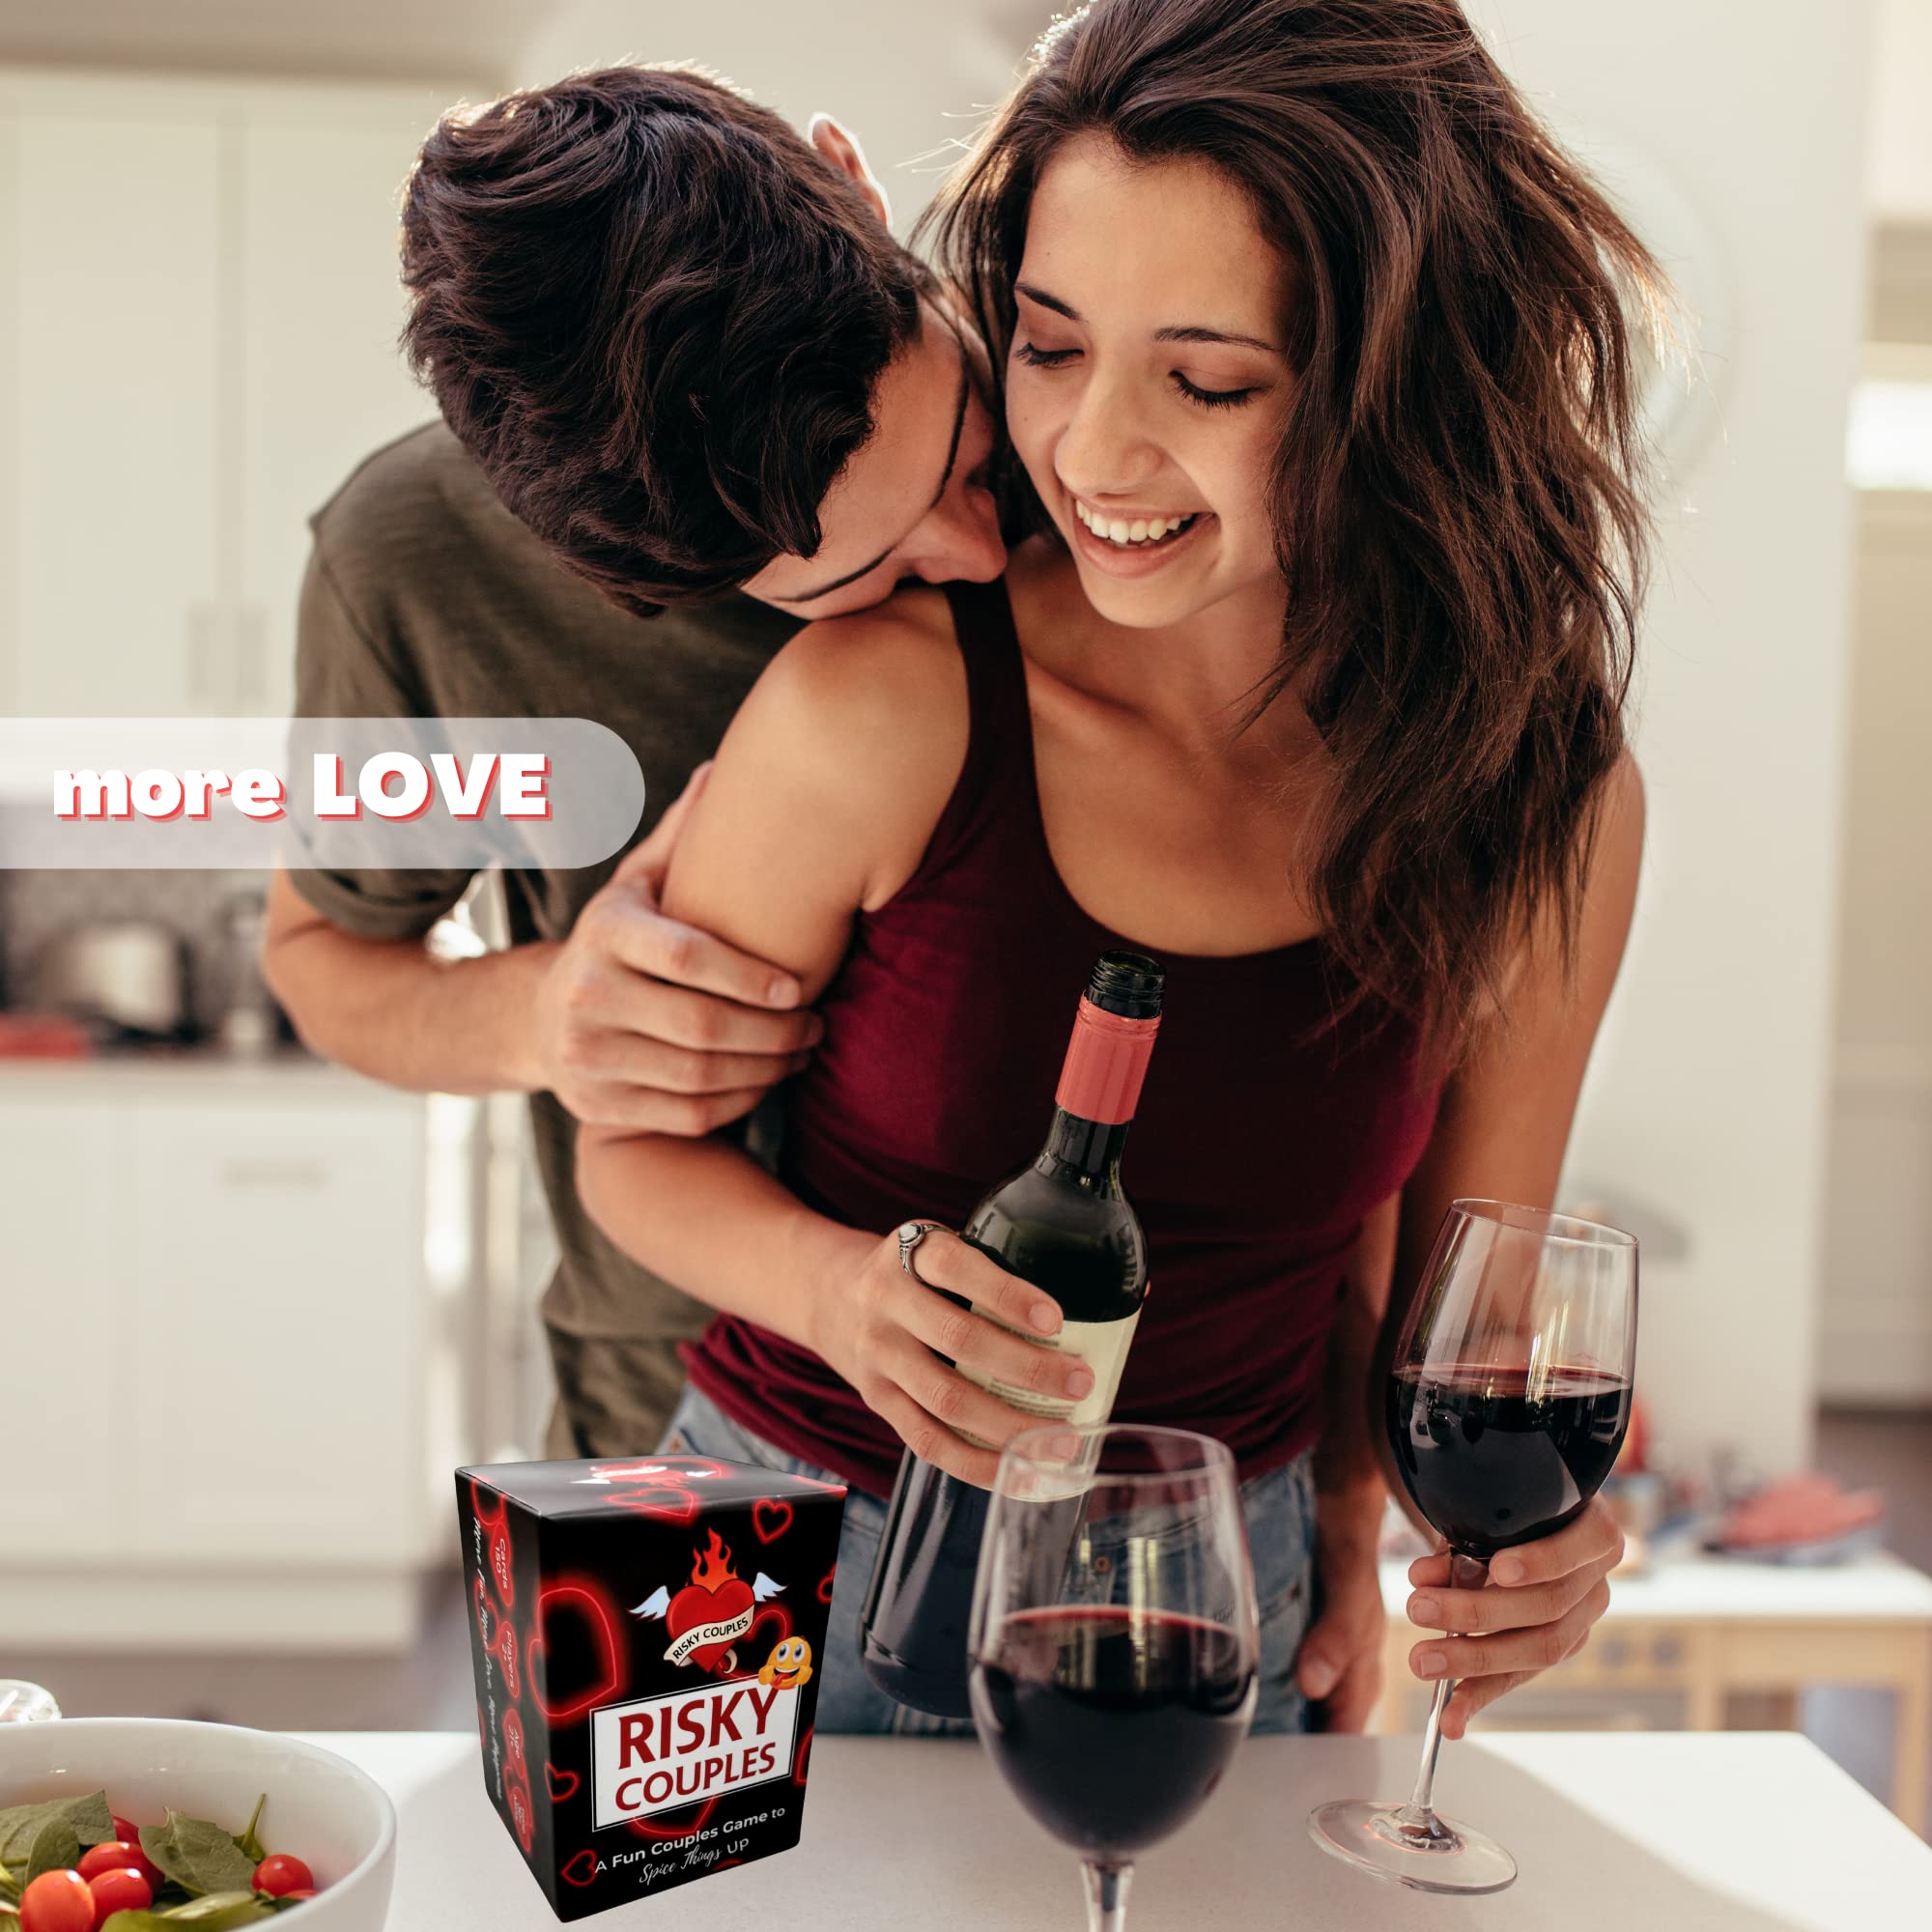 RISKY COUPLES - Super Fun Couples Game for Date Night: 150 Spicy Dares & Questions for Your Partner. Romantic Anniversary & Valentines Gifts. Card Game for Couple